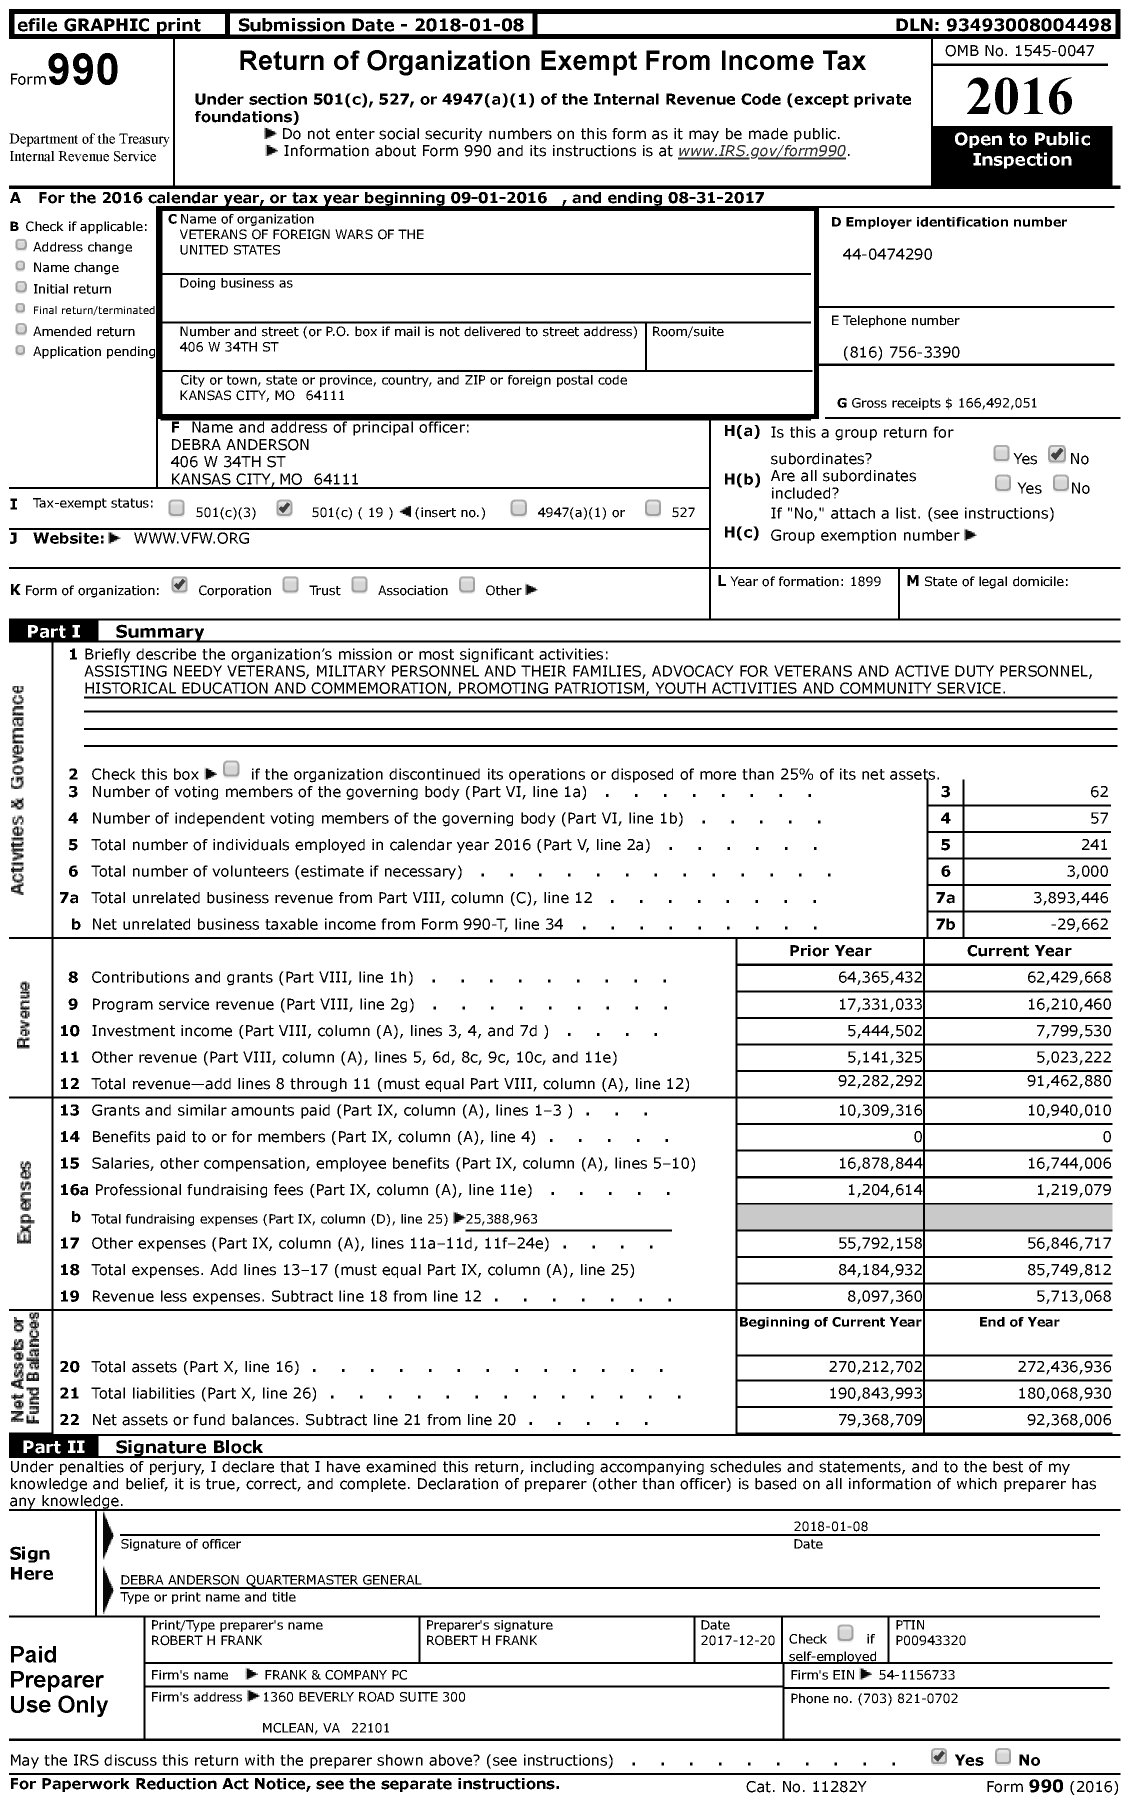 Image of first page of 2016 Form 990 for Veterans of Foreign Wars of the United States (VFW)